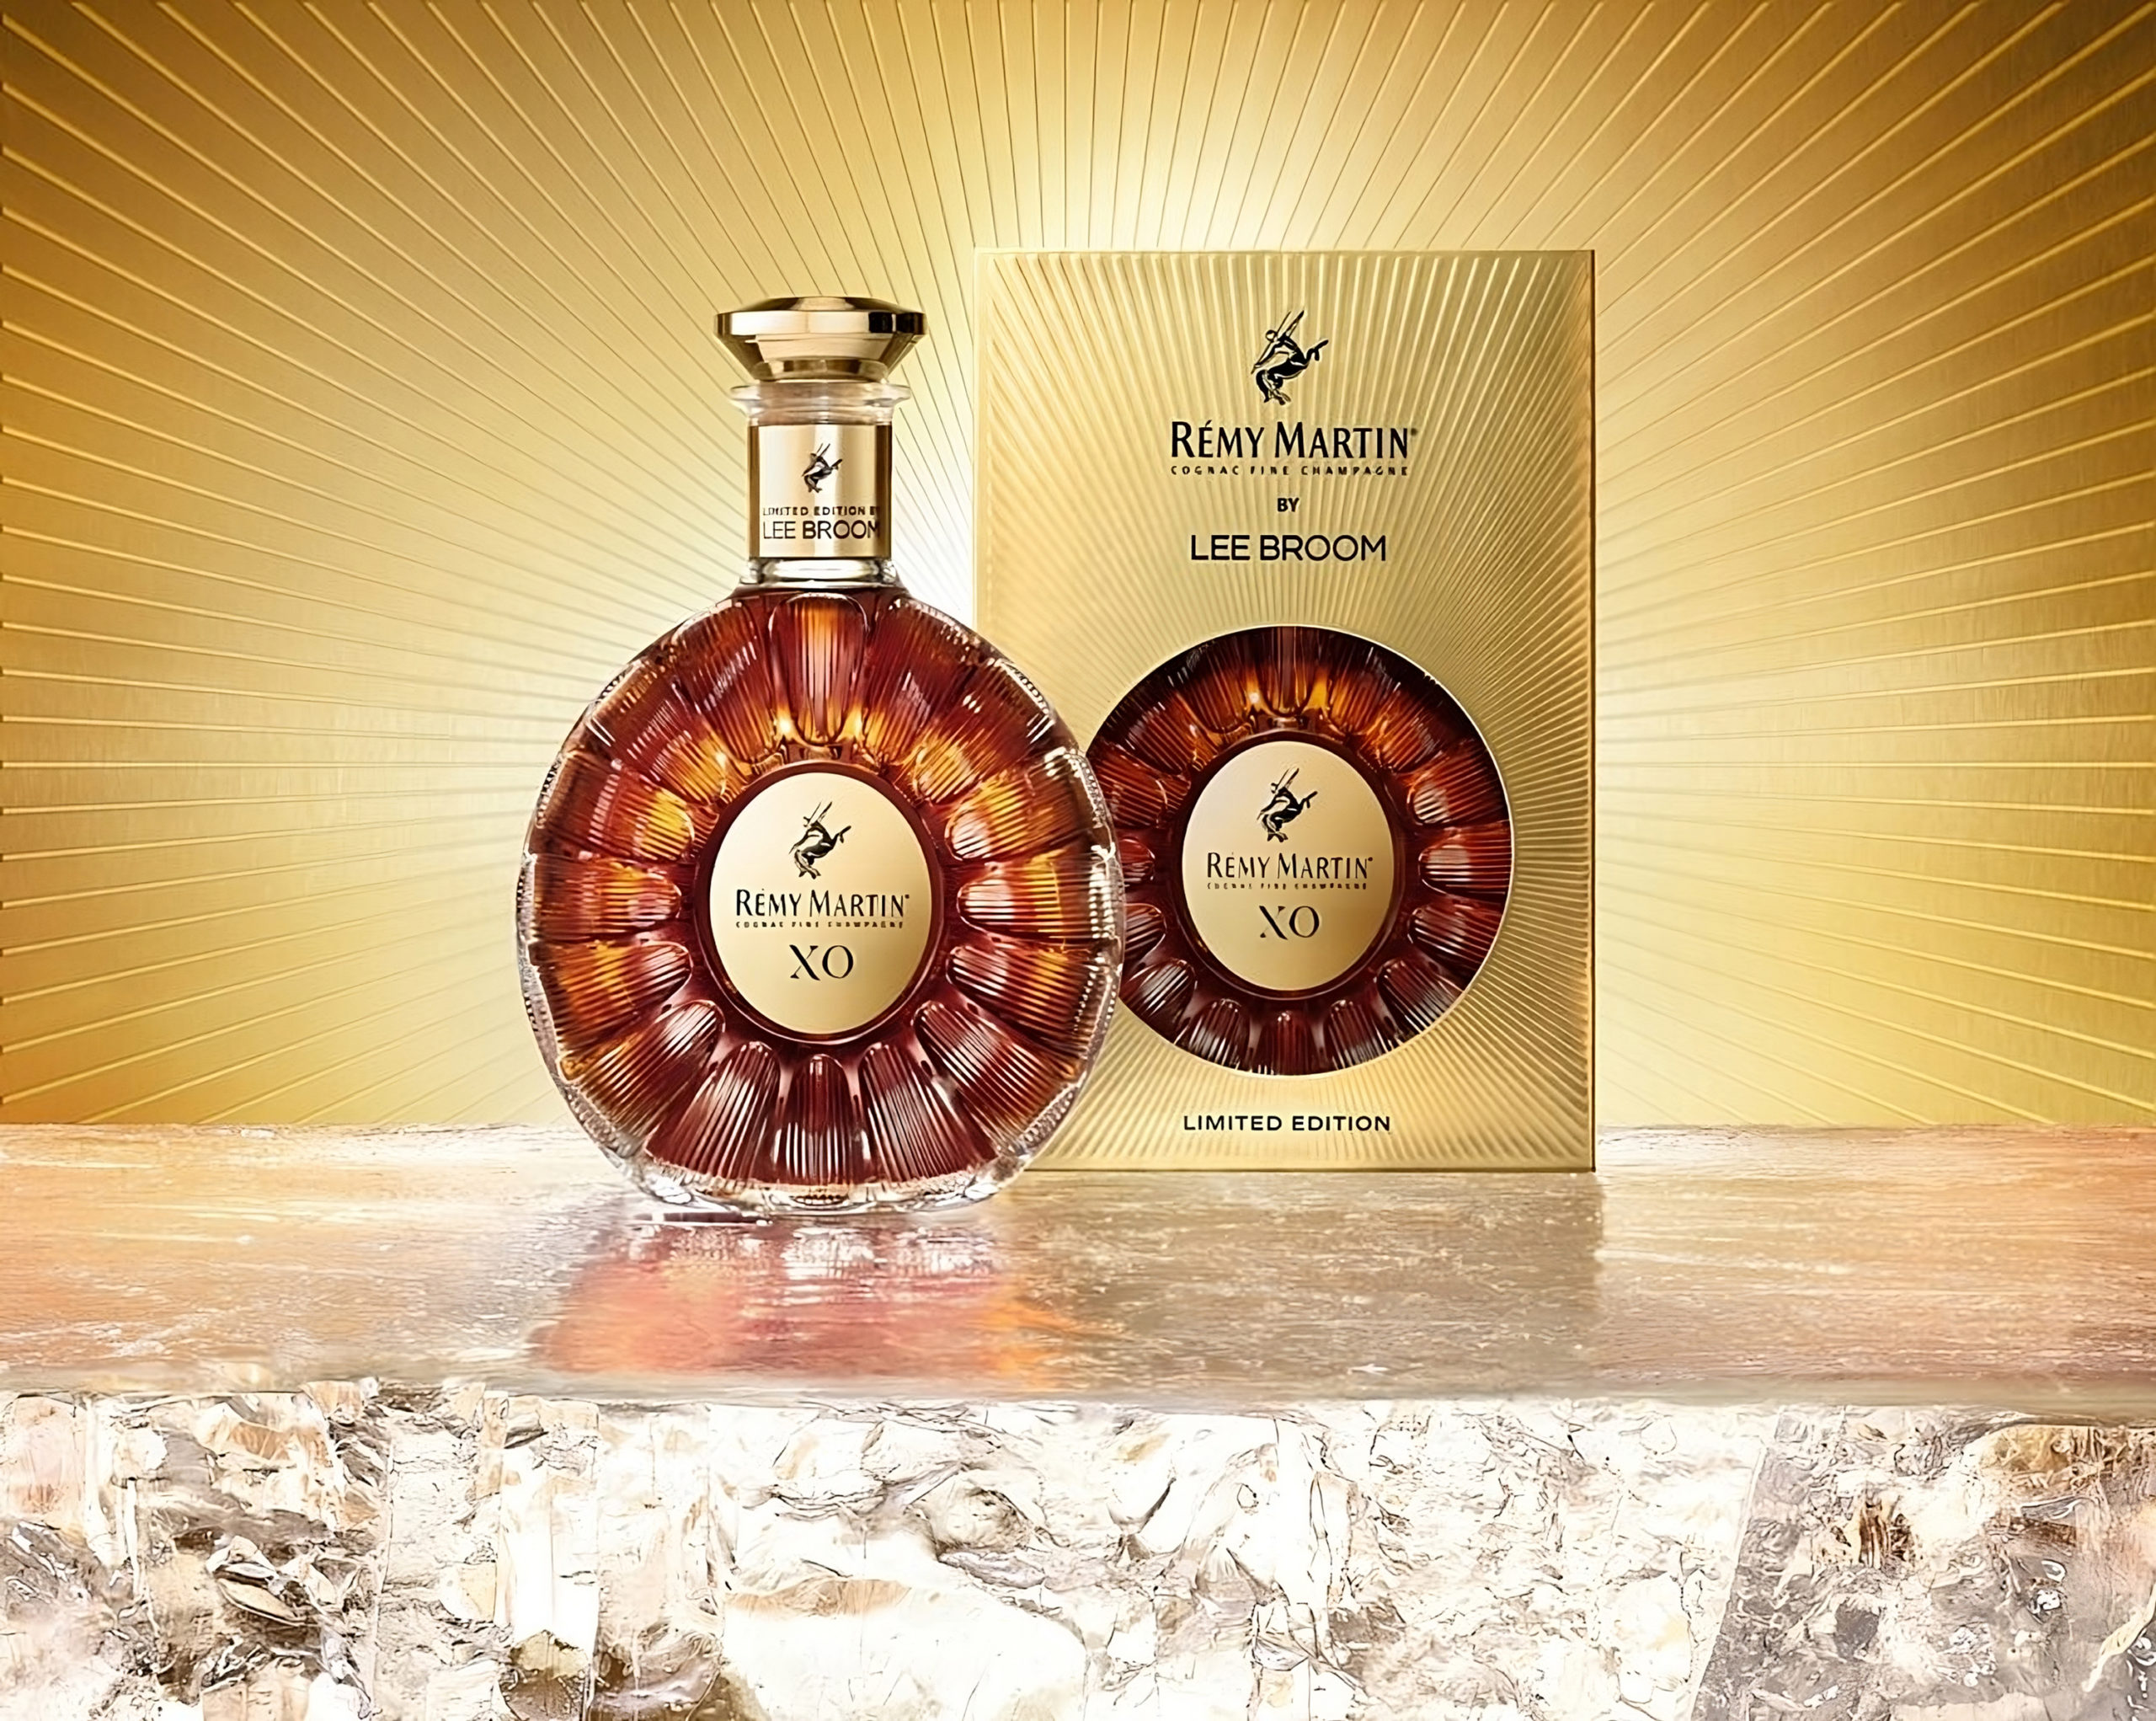 Remy-Martin-X_O-Lee-Broom-limited-edition-transformed